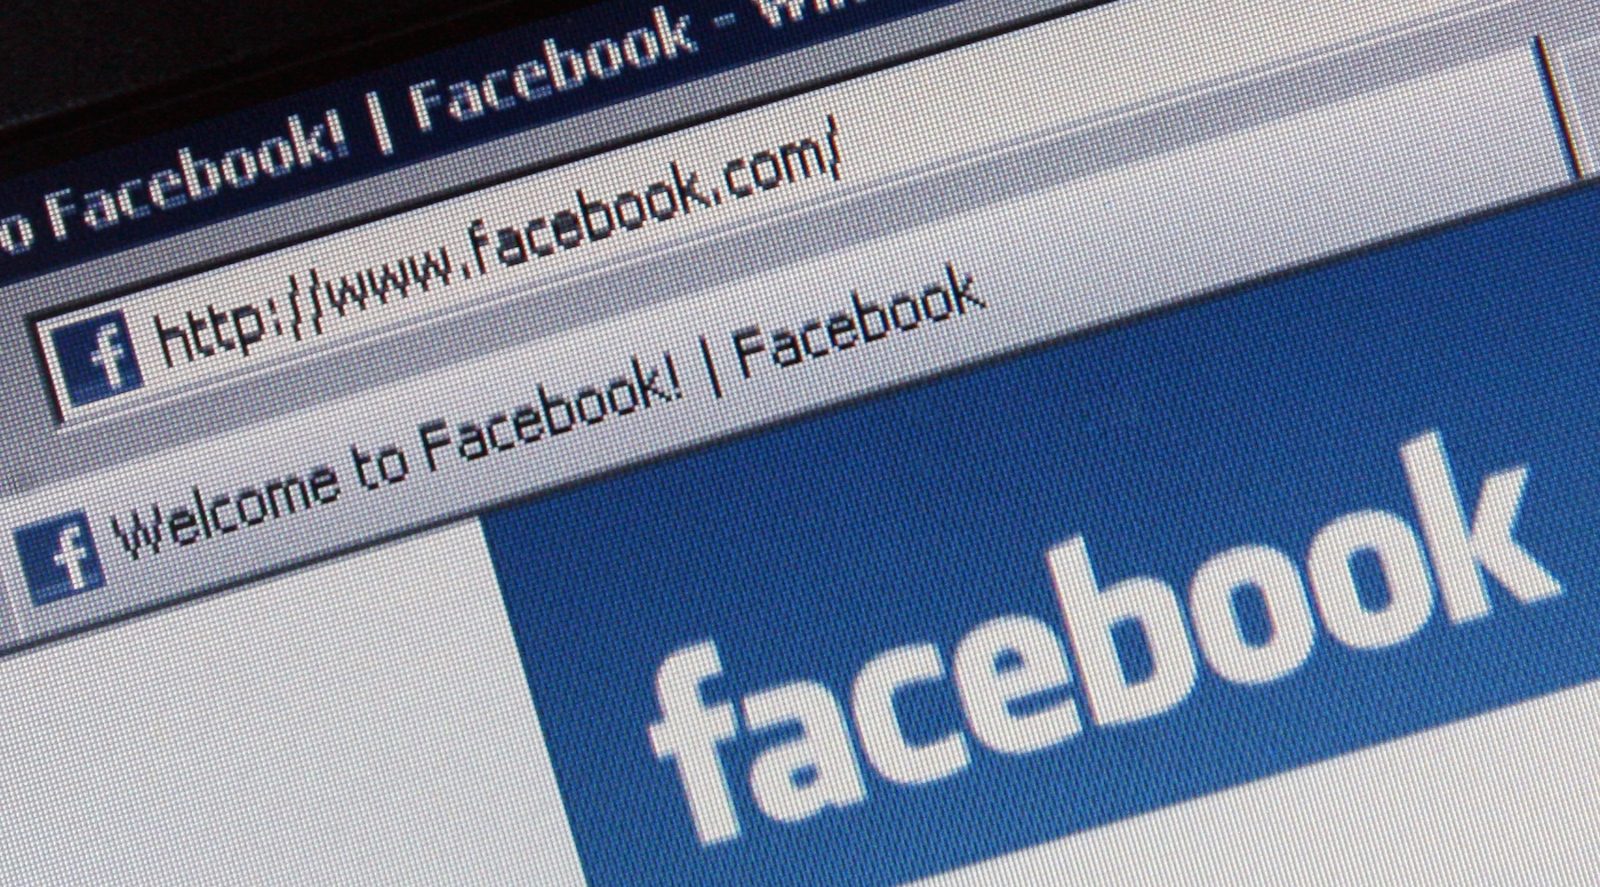 Facebook Facing Lawsuit For Collecting Text And Call Data of